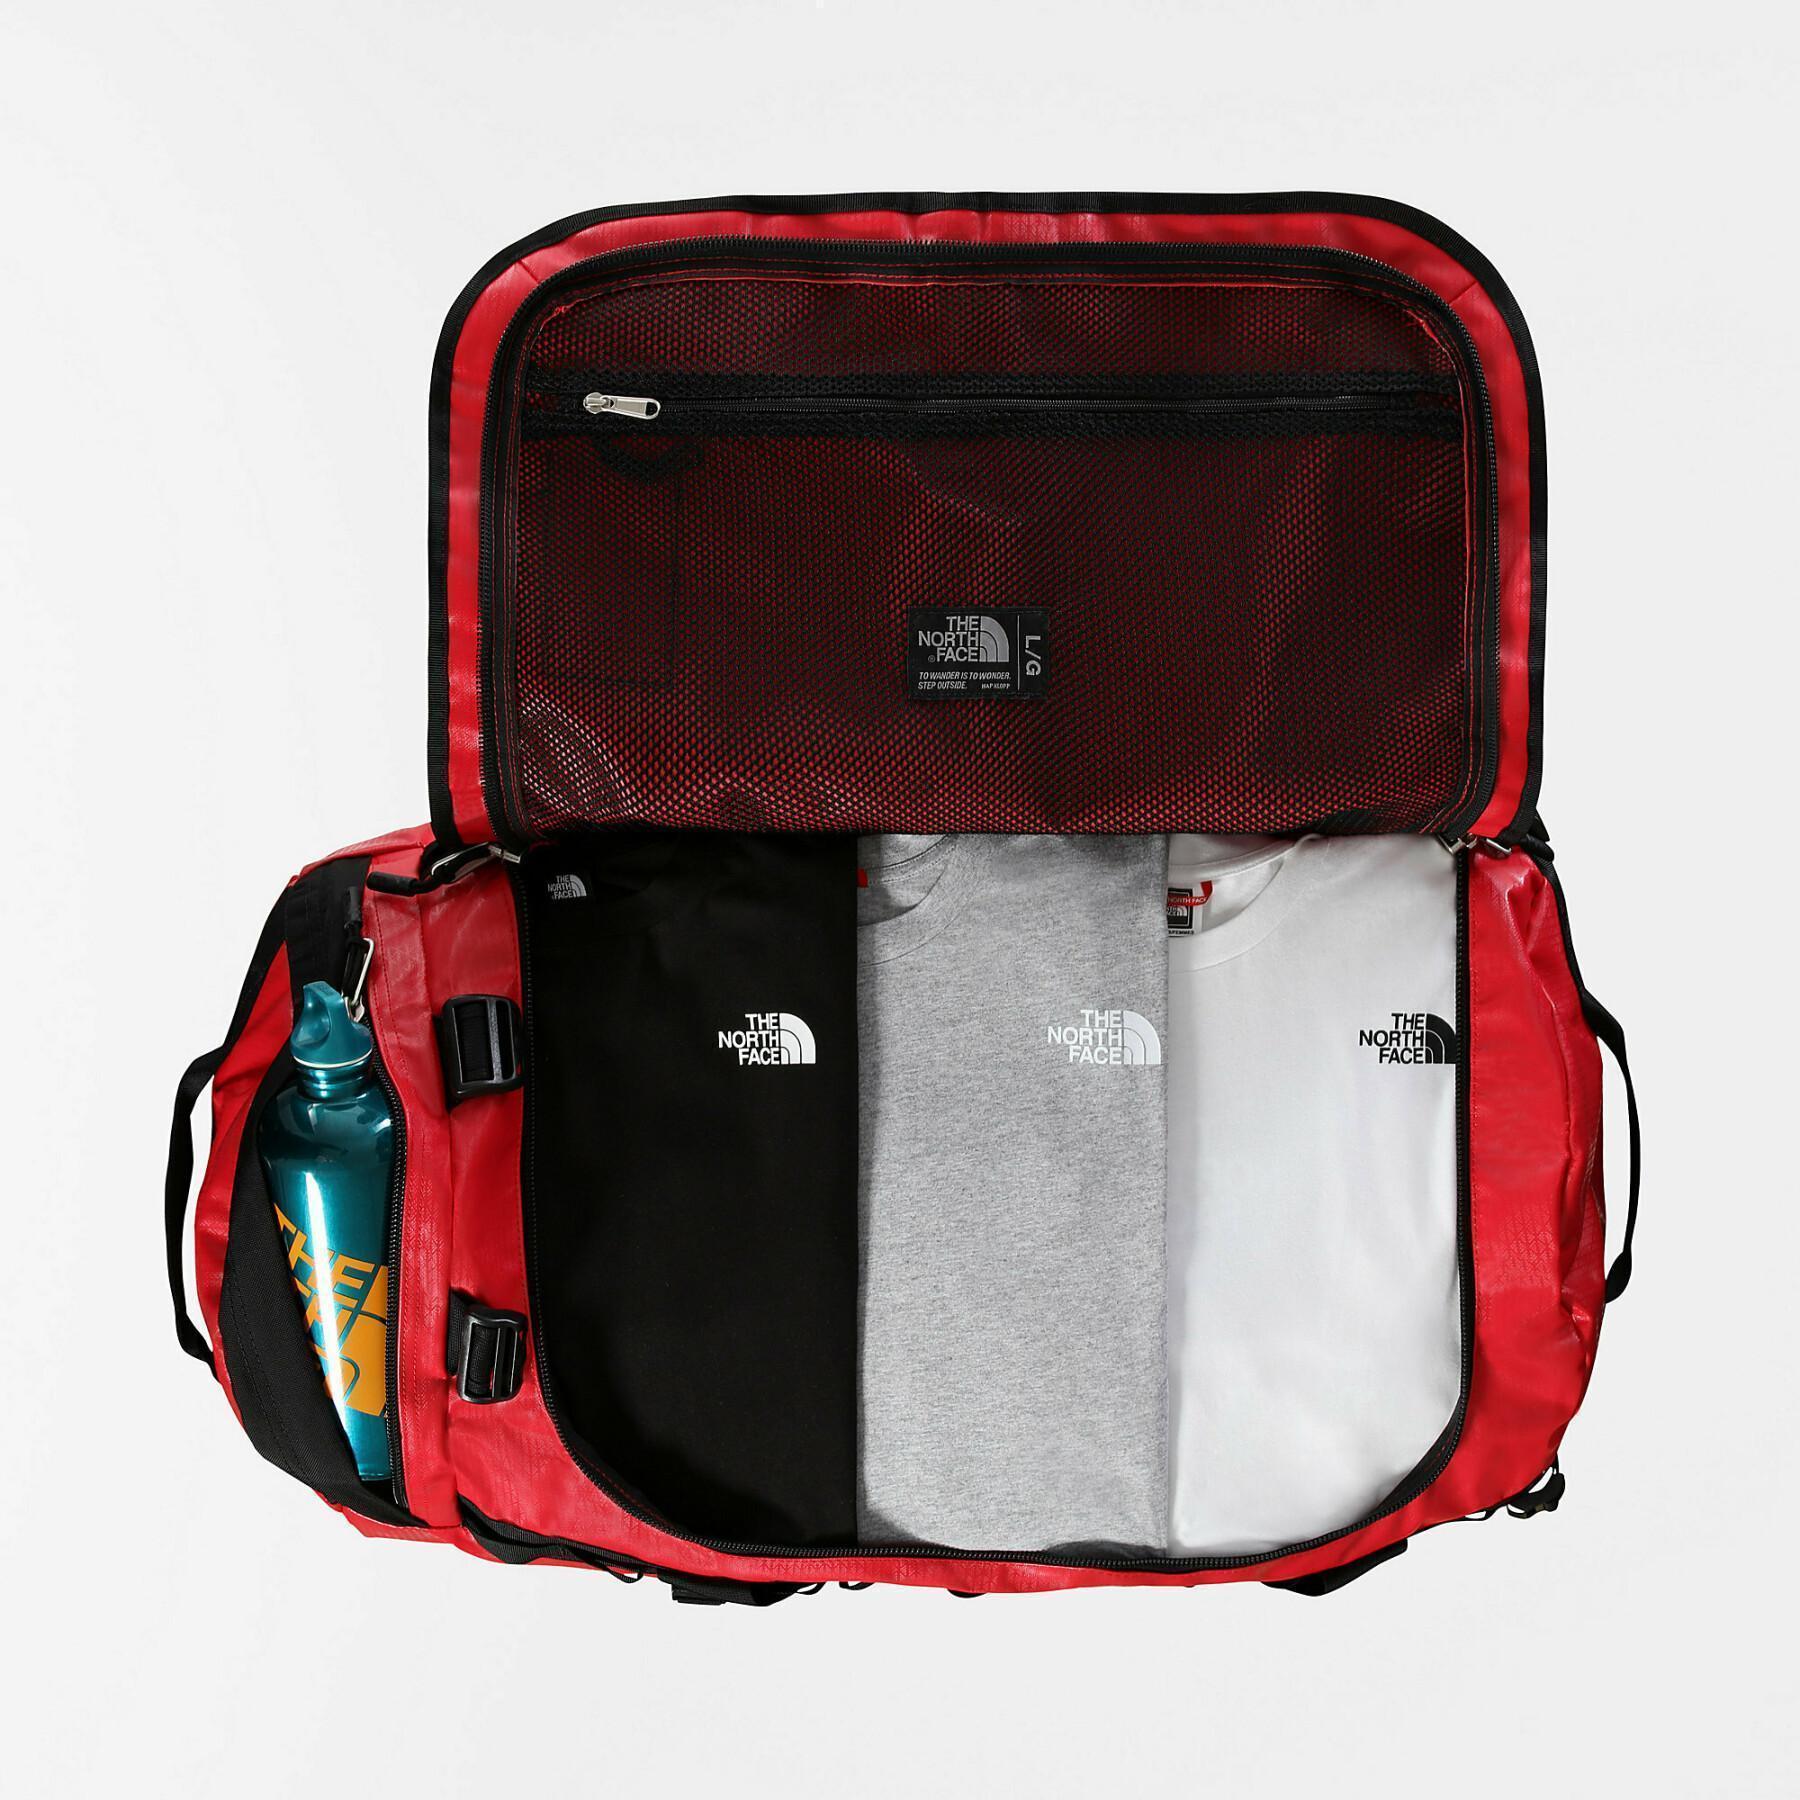 Travel bag The North Face Duffel